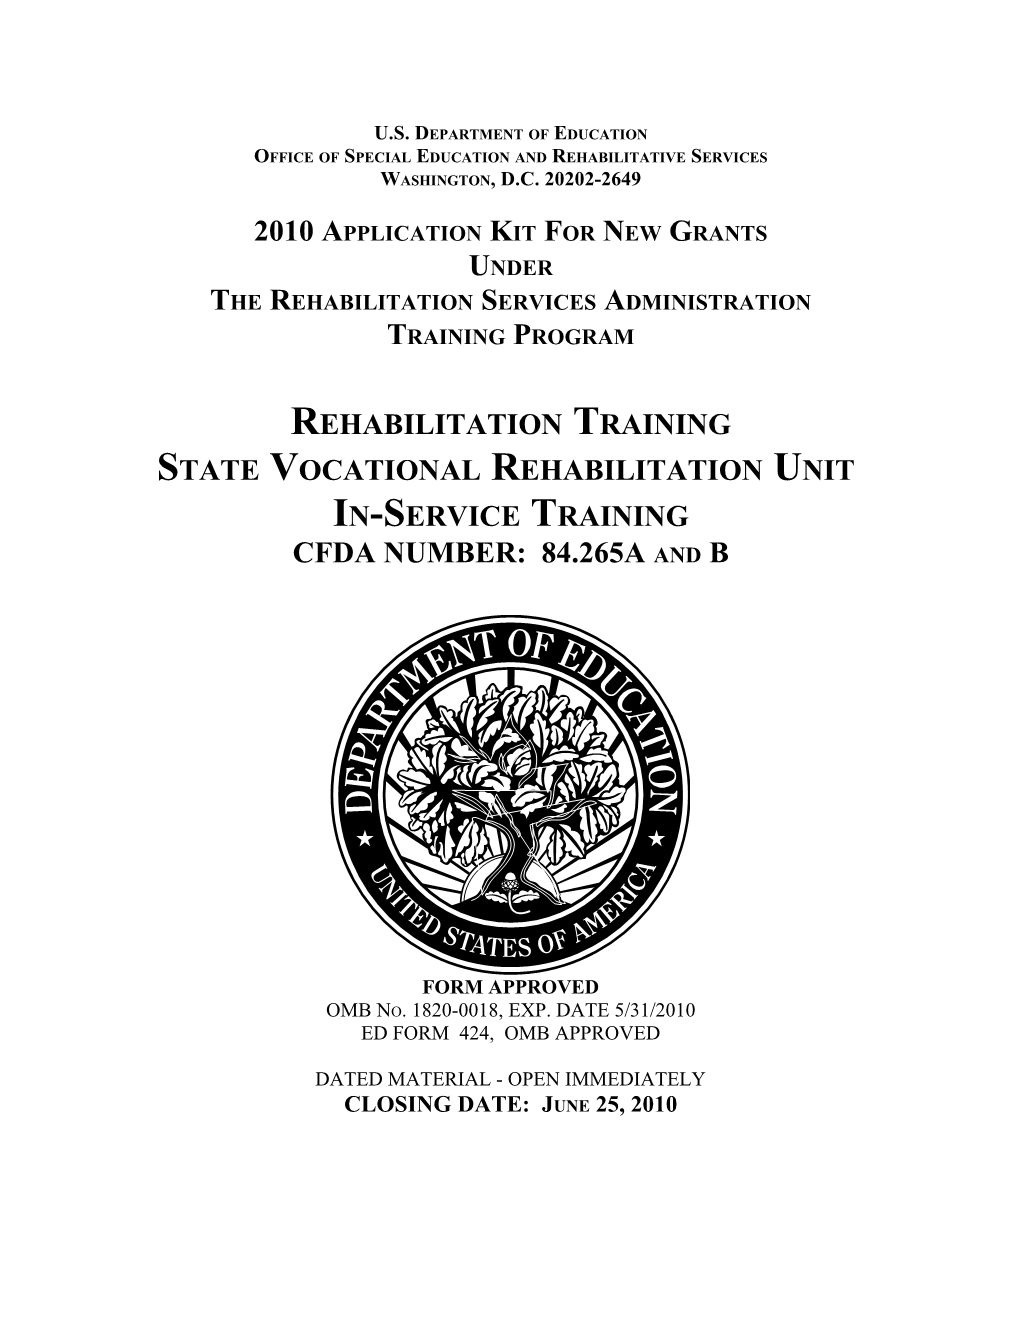 FY10 Application Kit for New Grants Under the Rehabilitation Services Administration Training